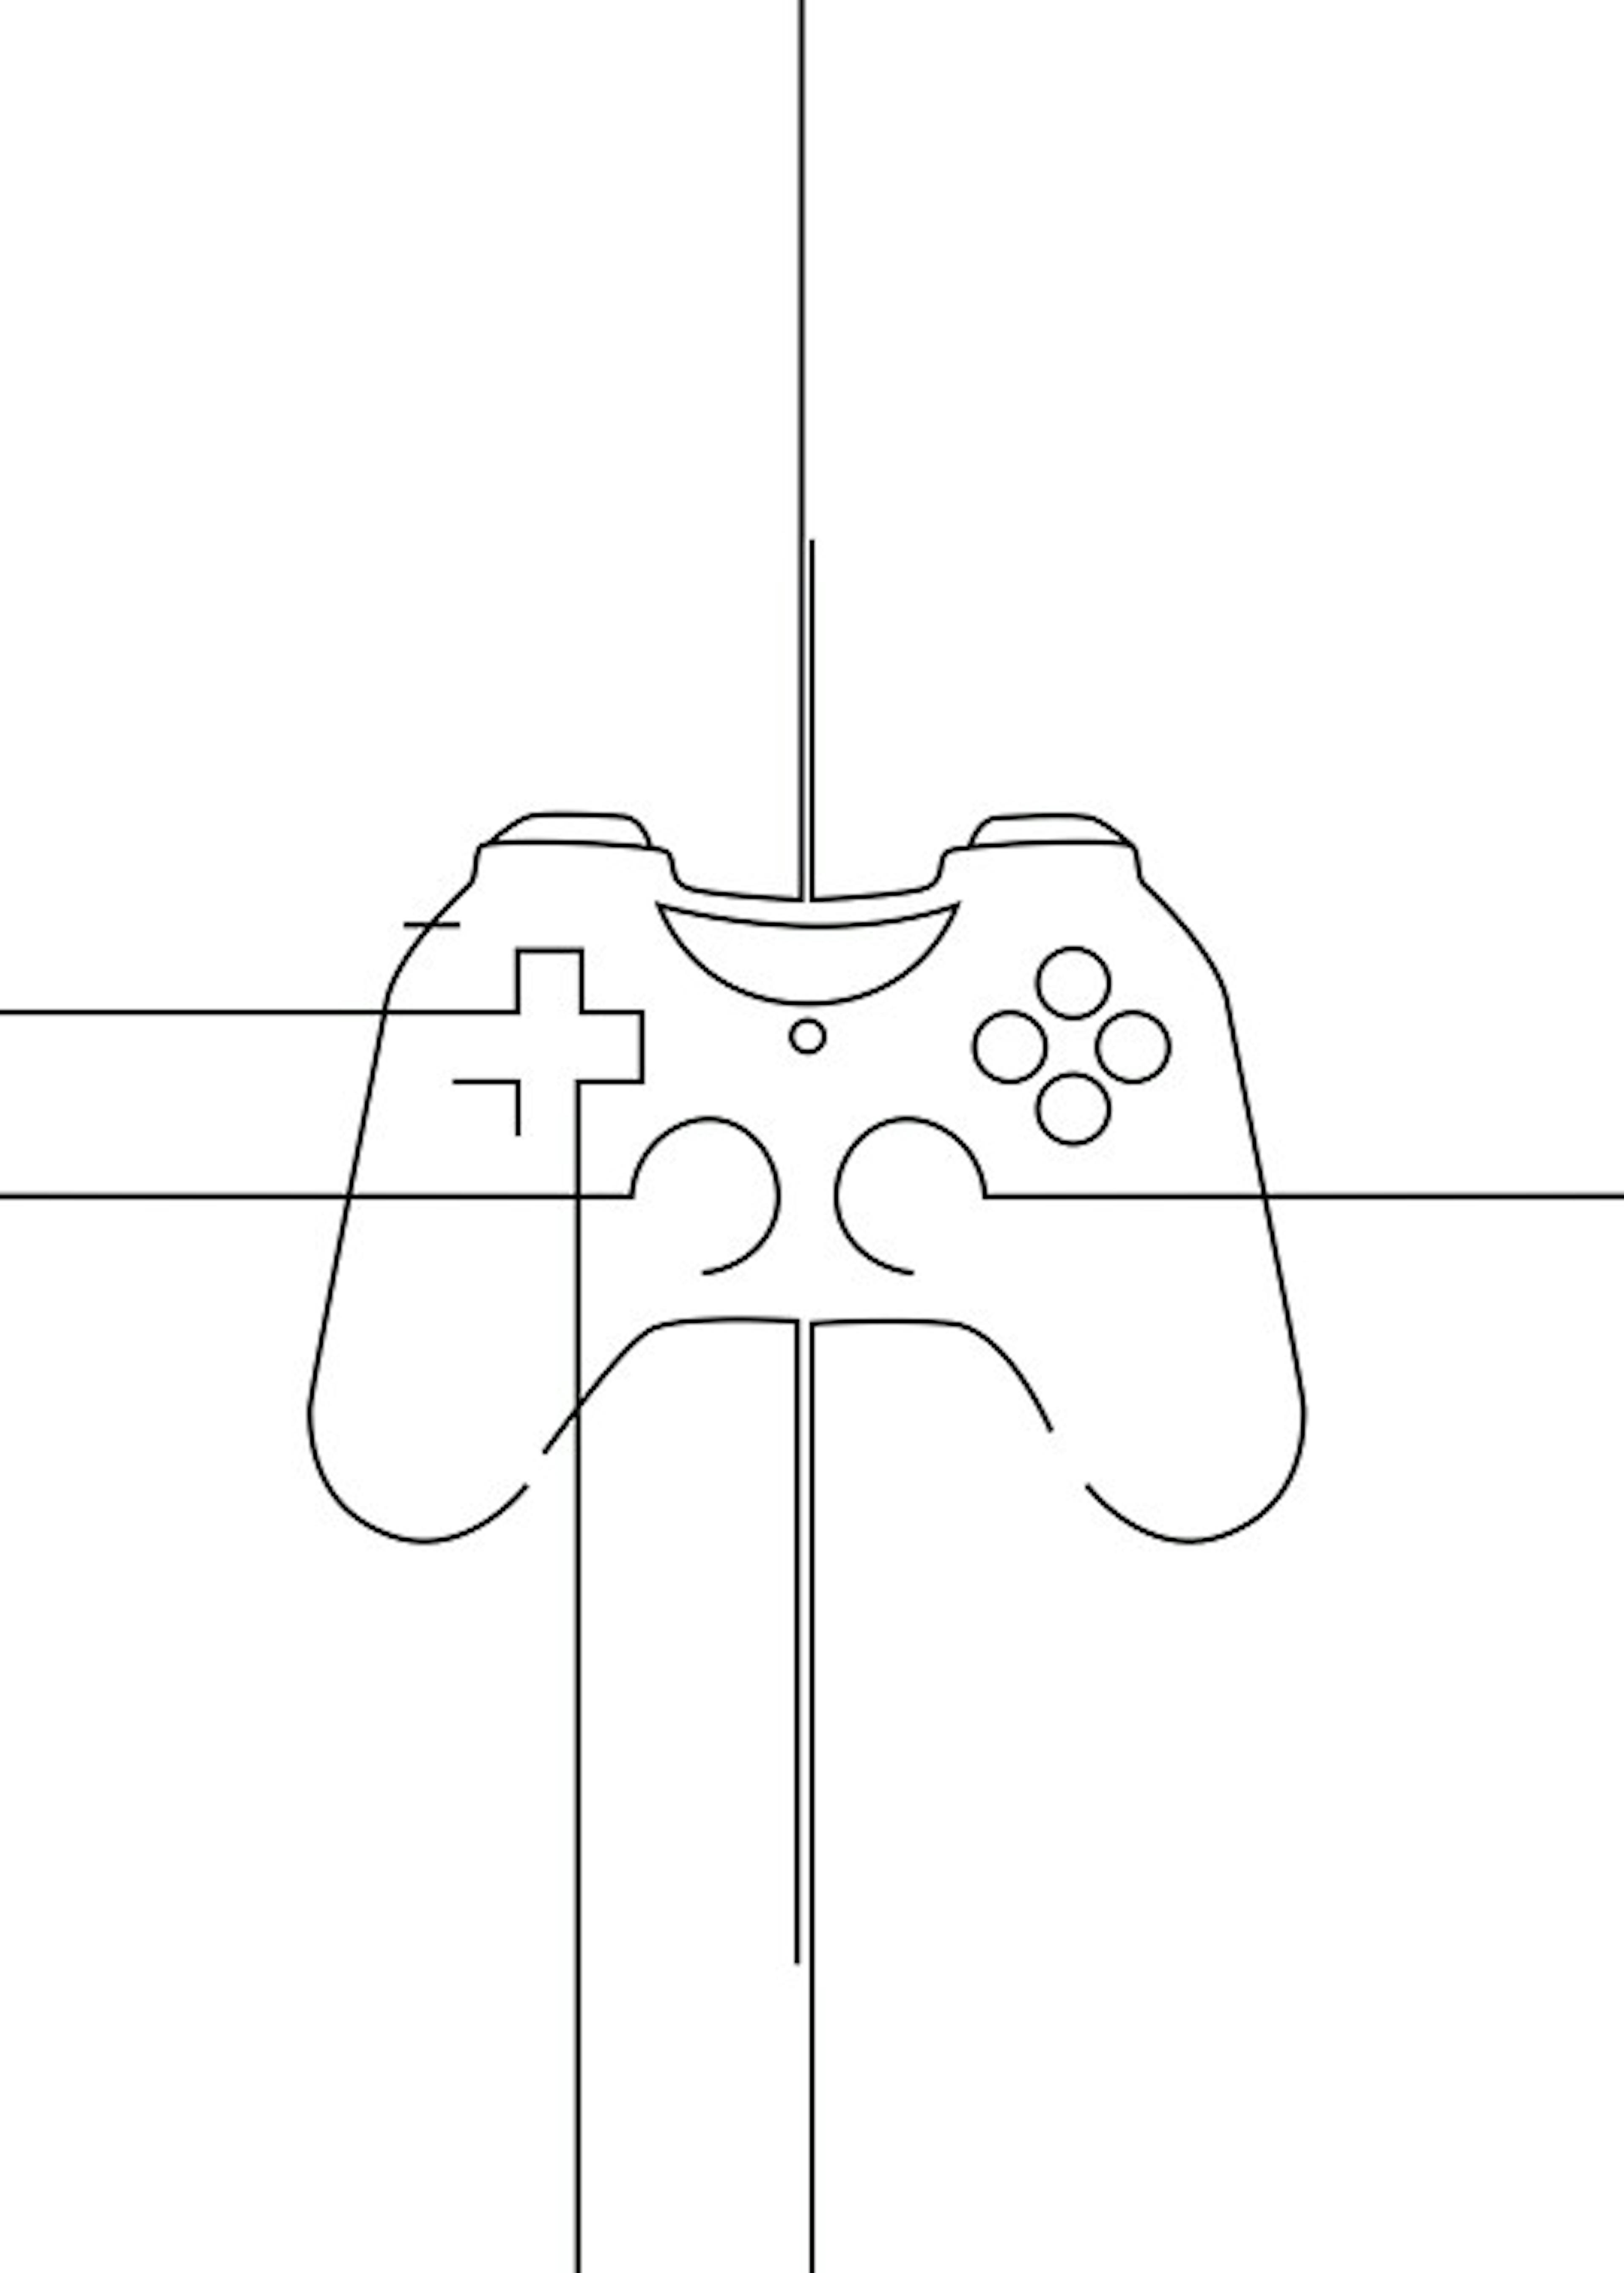 Game Controller Poster 0